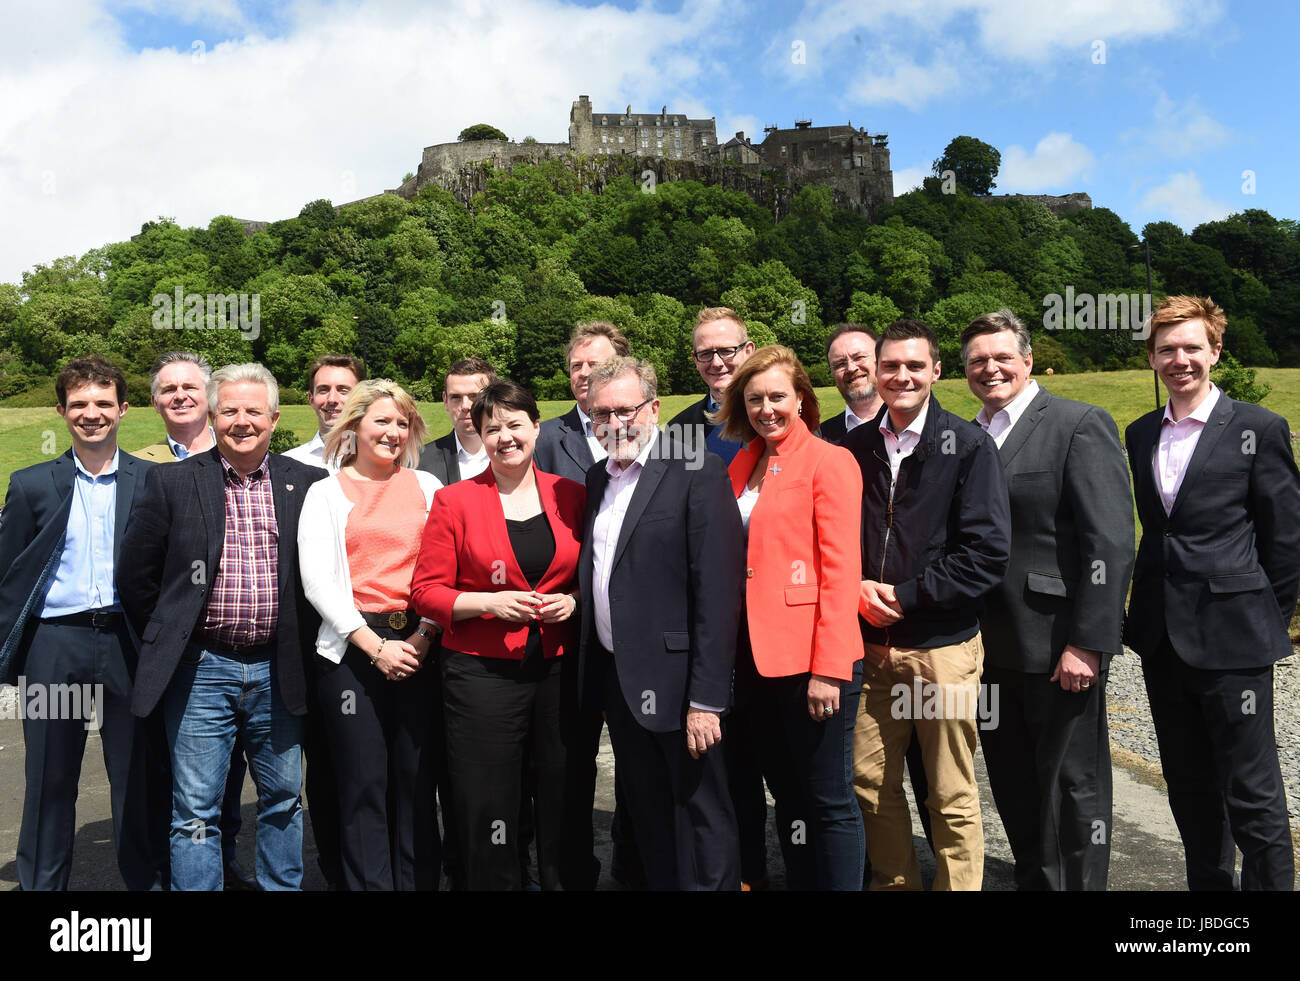 RETRANSMITTED ADDING LEFT TO RIGHT Scottish Conservative leader Ruth Davidson (red jacket) at a photo call with the party's newly-elected members of parliament in front of Stirling Castle. Left to right: Andrew Bowie MP, Colin Clark MP, Bill Grant MP, Luke Graham MP, Kirstene Hair MP, Douglas Ross MP, Ruth Davidson, Alister Jack MP, David Mundell MP, John Lamont MP, Rachael Hamilton MSP, David Duguid MP, Ross Thomson MP, Stephen Kerr MP, Paul Masterton MP. Stock Photo